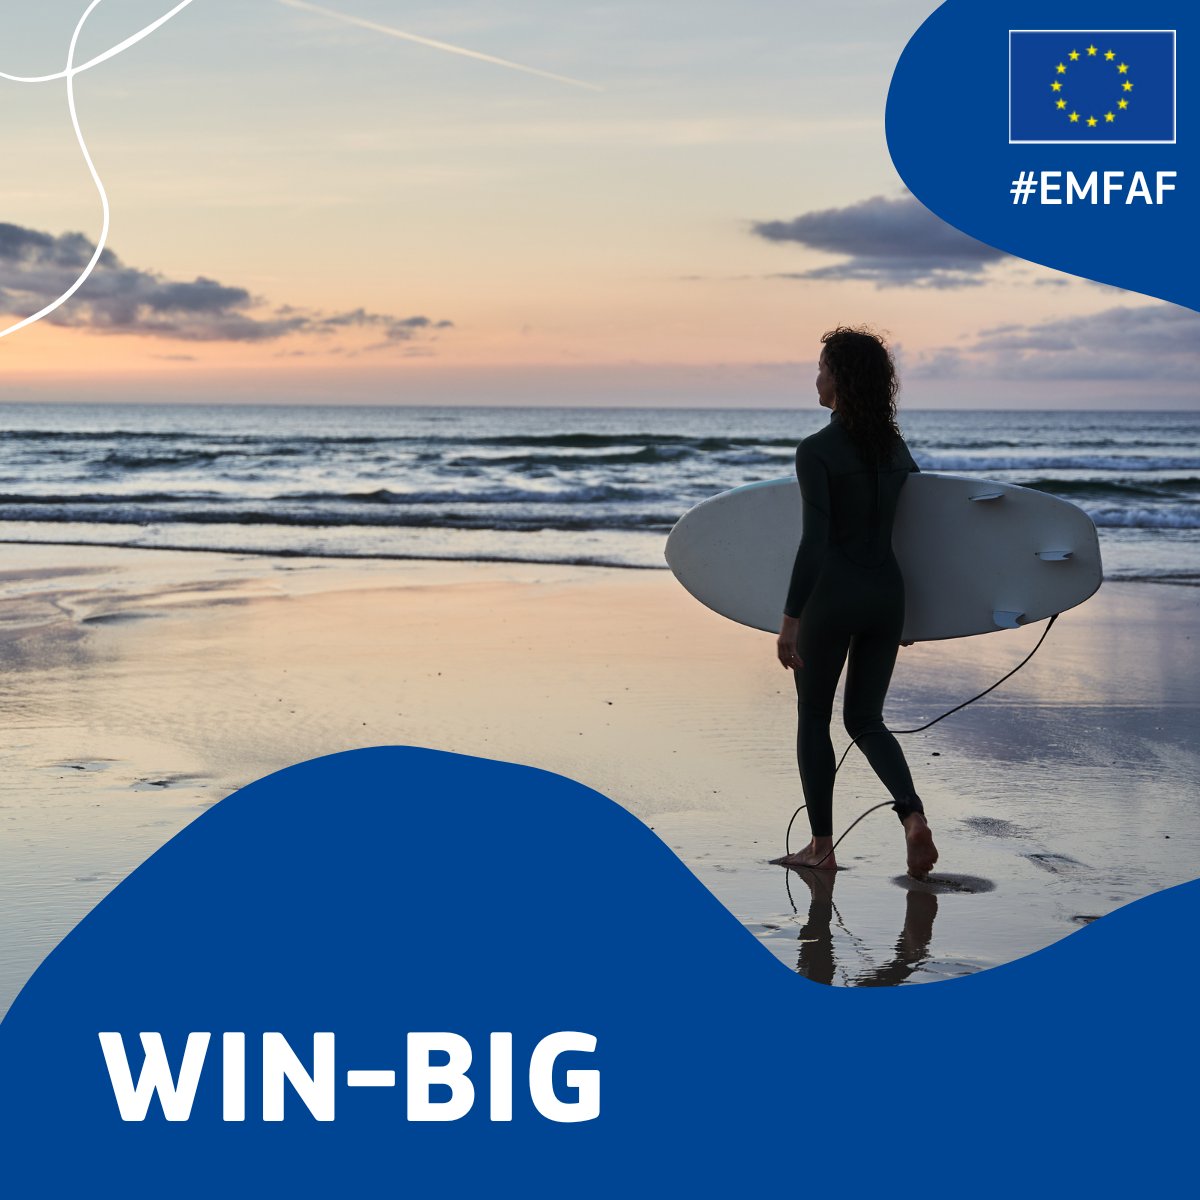 Despite advancements, women make up only 29% of the workforce in the #BlueEconomy. The #EU #EMFAF @WINBIG_EU project aims to raise awareness of gender-related issues and facilitate women's progression within blue careers🌊 Read the full story 👇 europa.eu/!KbxFxn